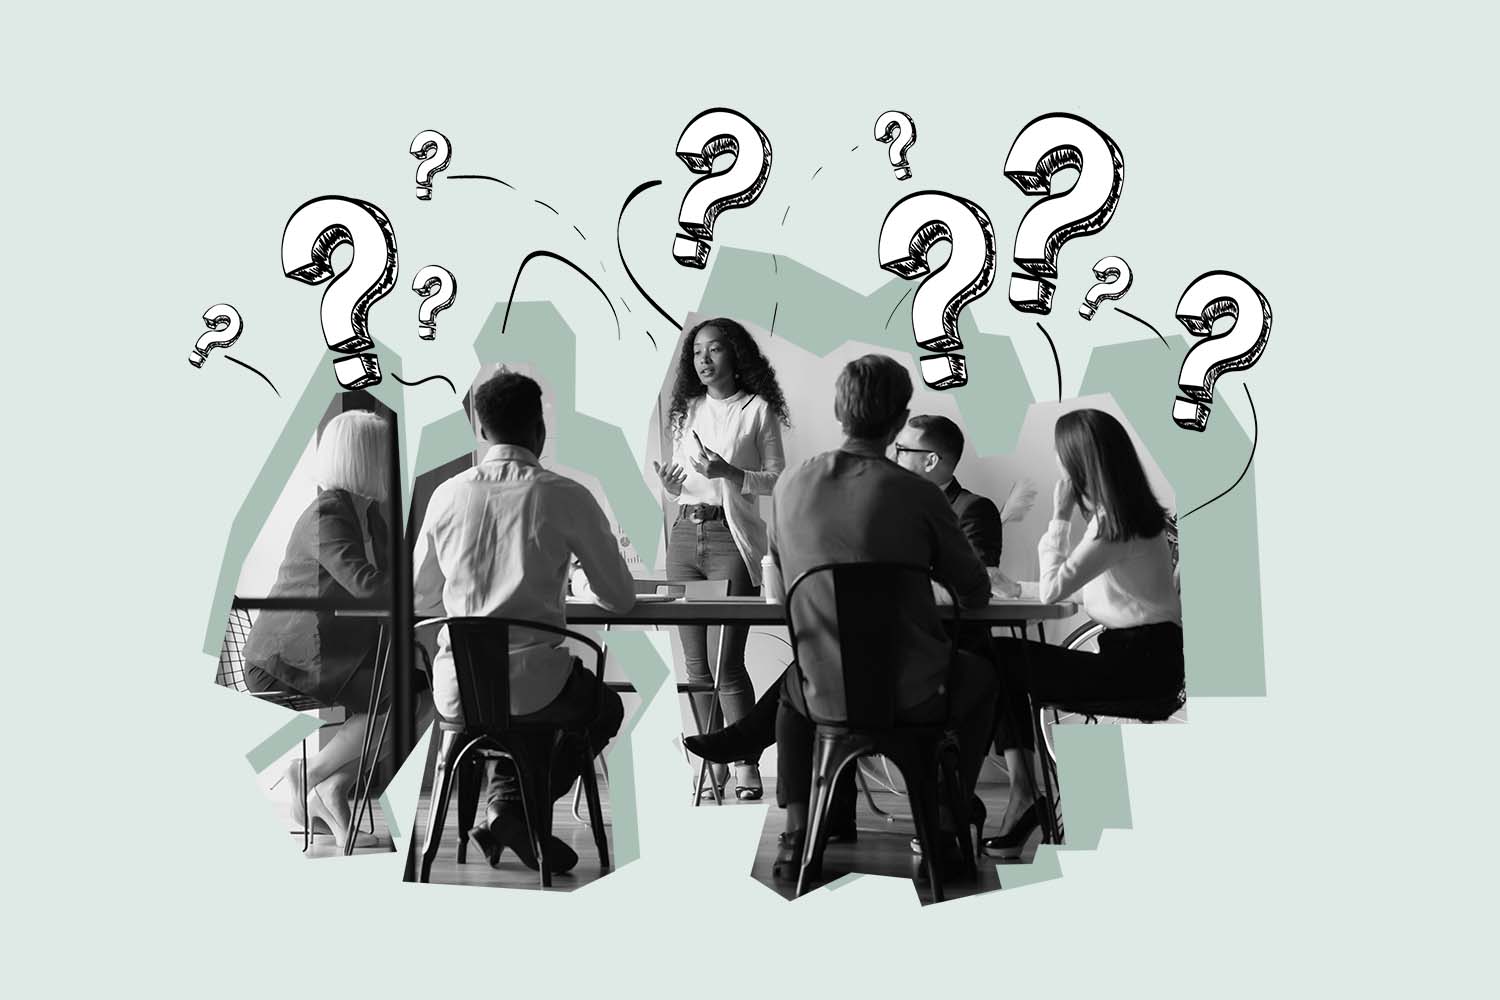 People sit at table and question marks float above